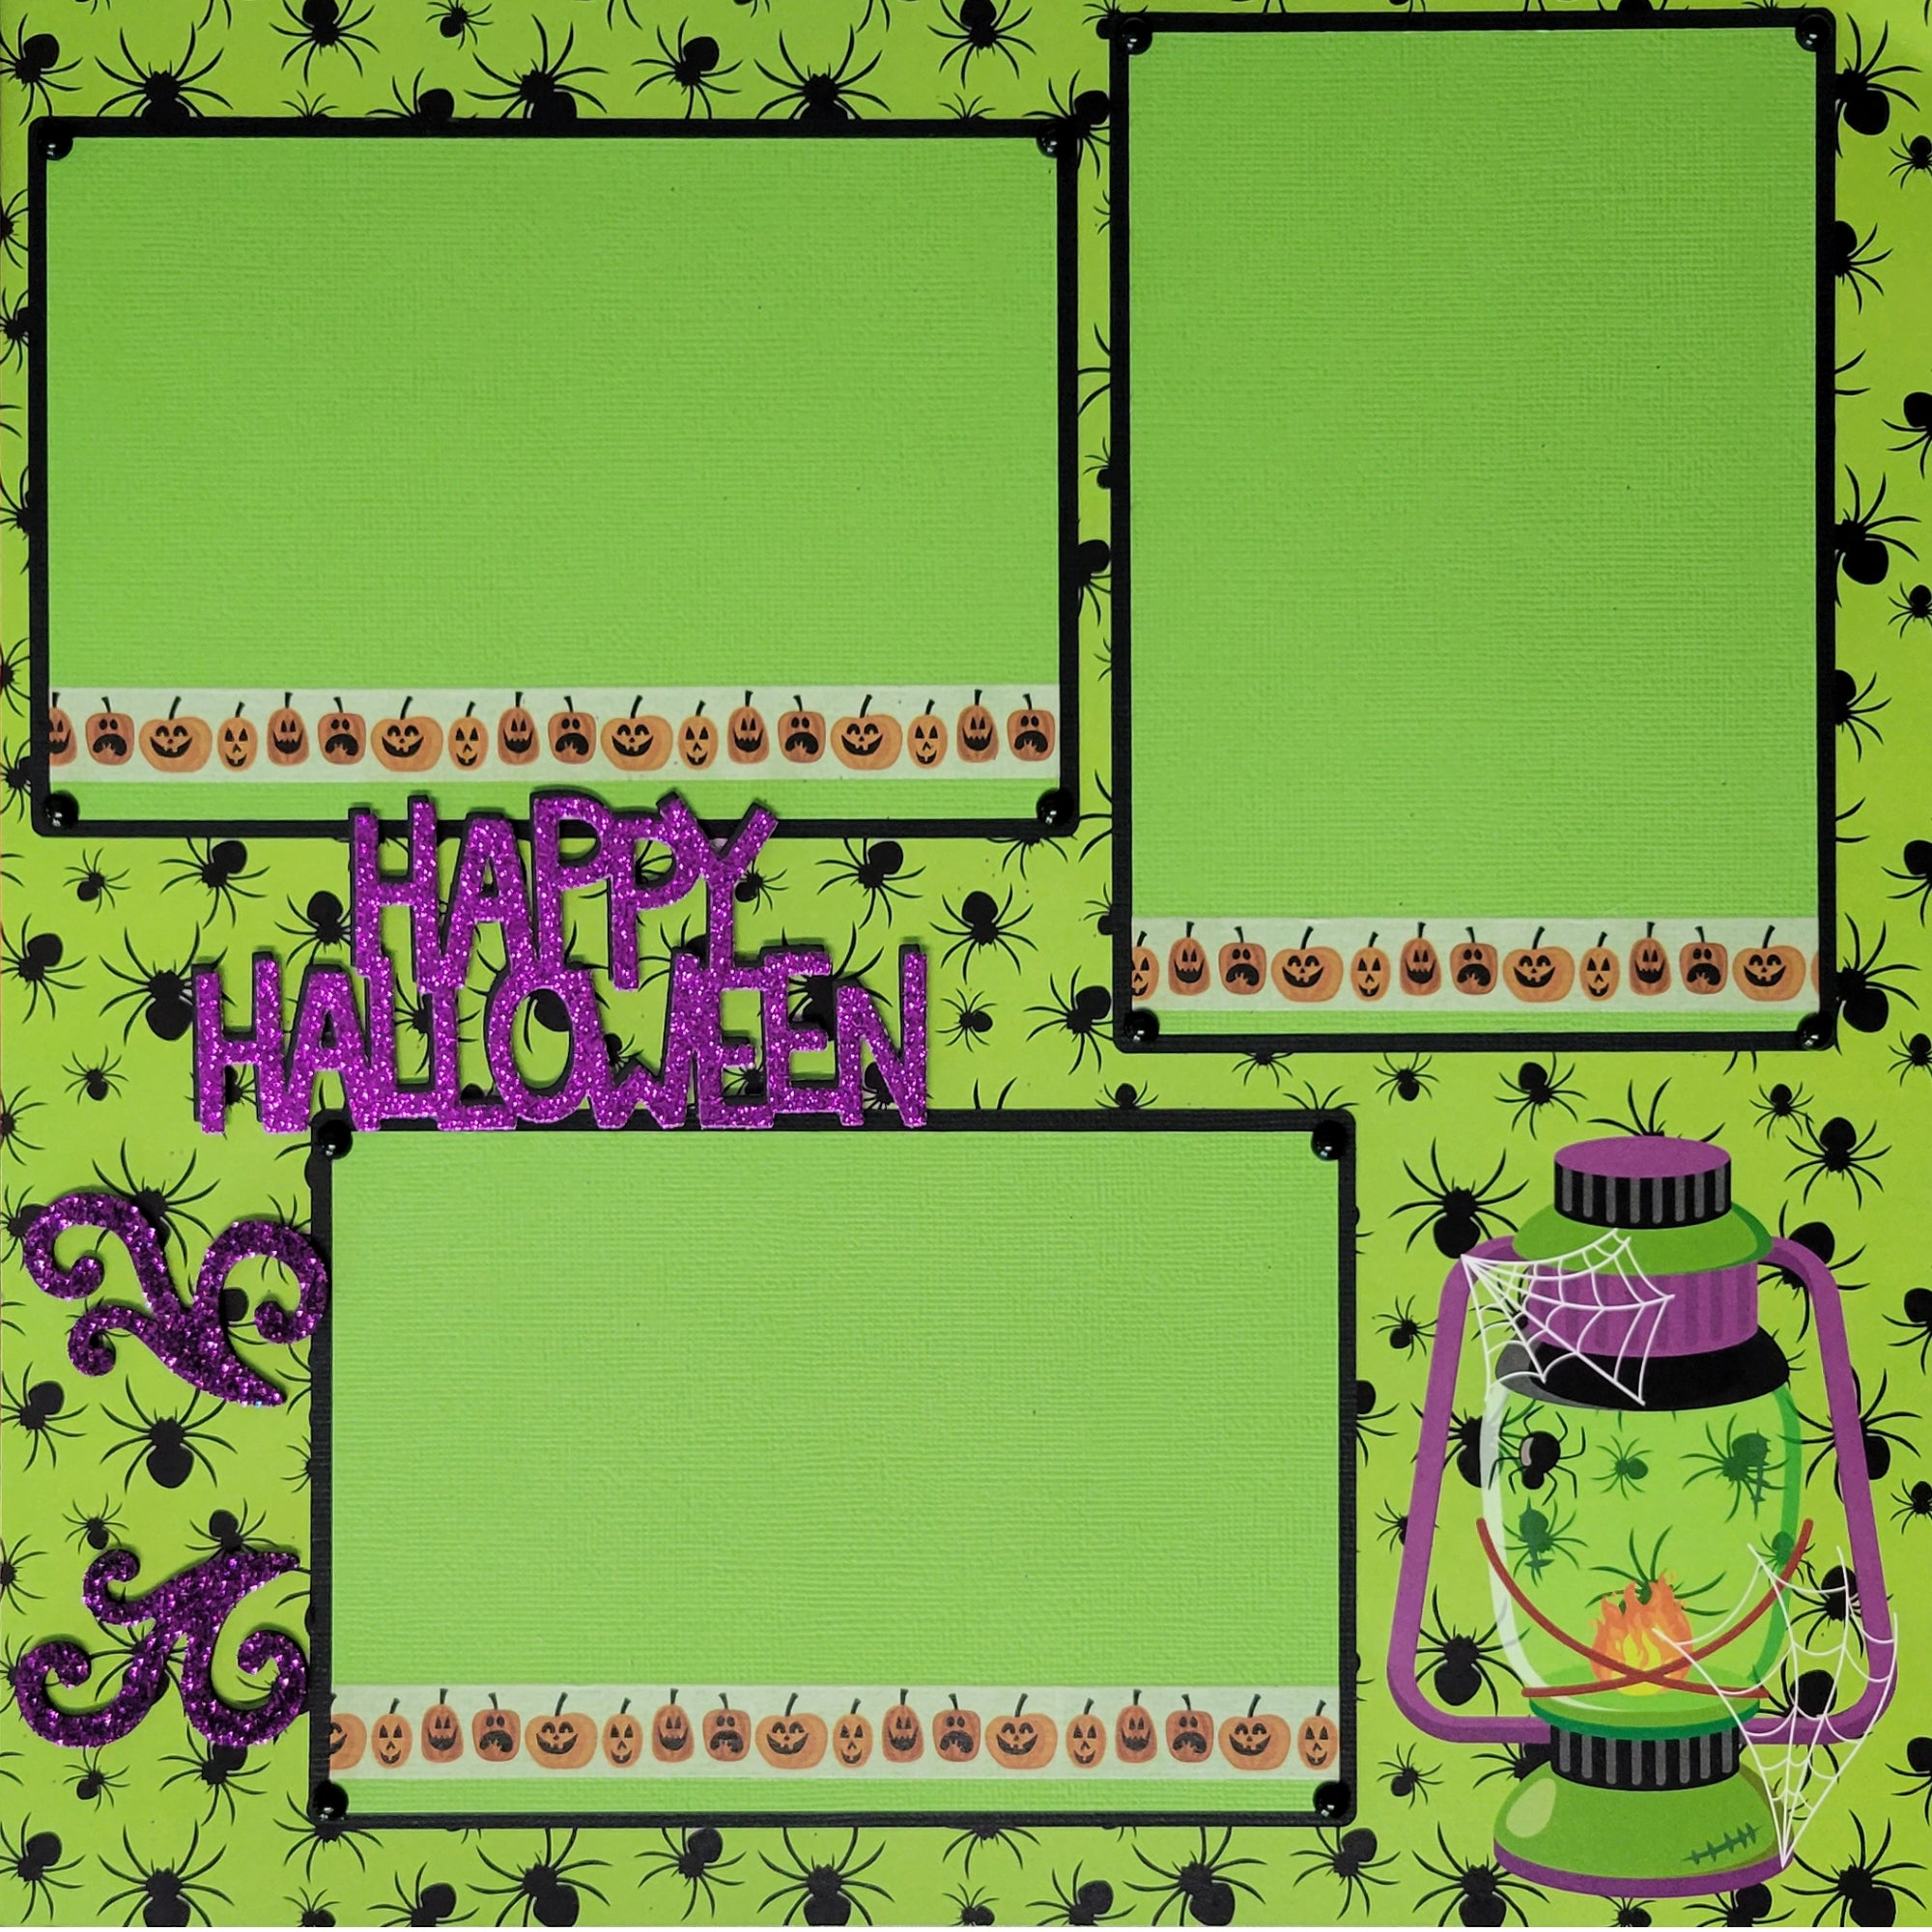 Happy Camp-o-ween (2) - 12 x 12 Pages, Fully-Assembled & Hand-Crafted 3D Scrapbook Premade by SSC Designs